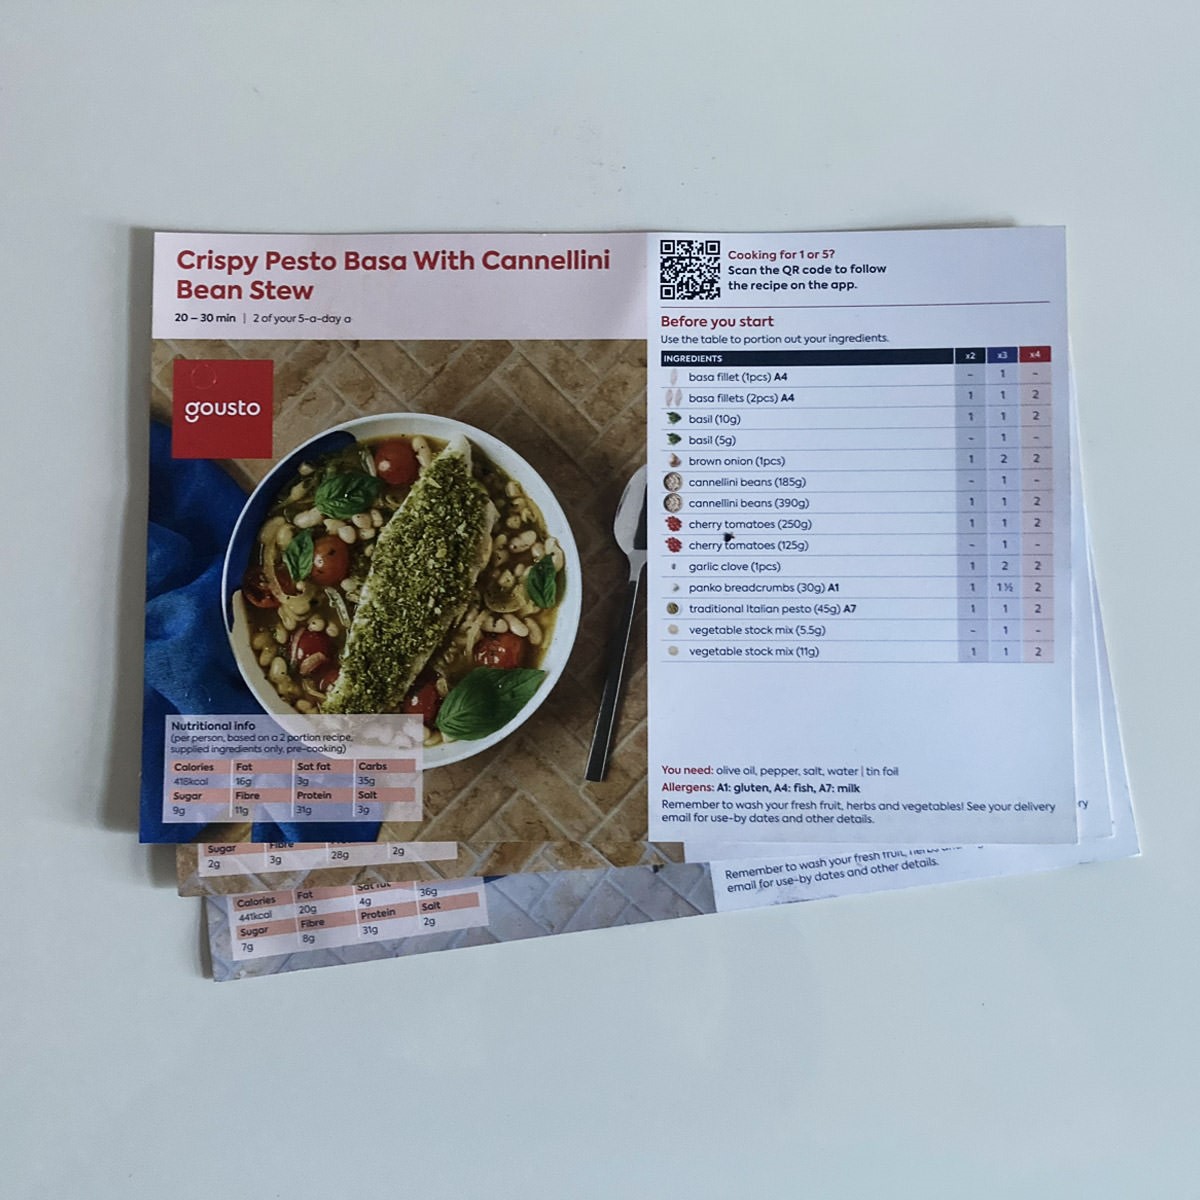 Superfried – Walk the Talk. Testing eco credentials of Gousto recipe boxes. Image of recipe cards. Continuing my path towards eco living. 